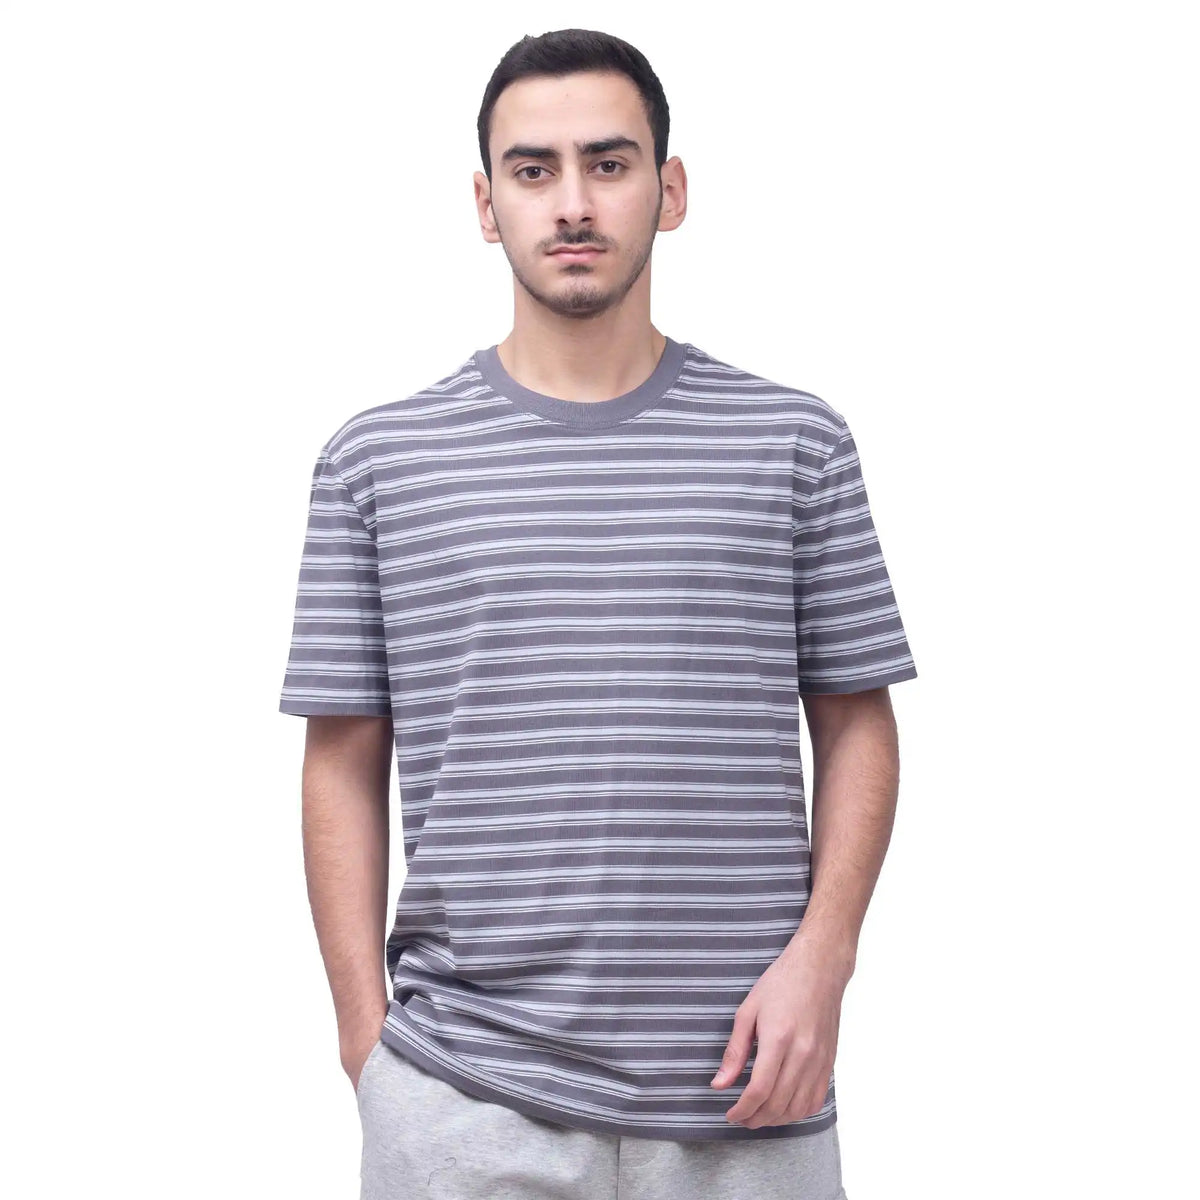 Stripped Casual T.Shirt For Men